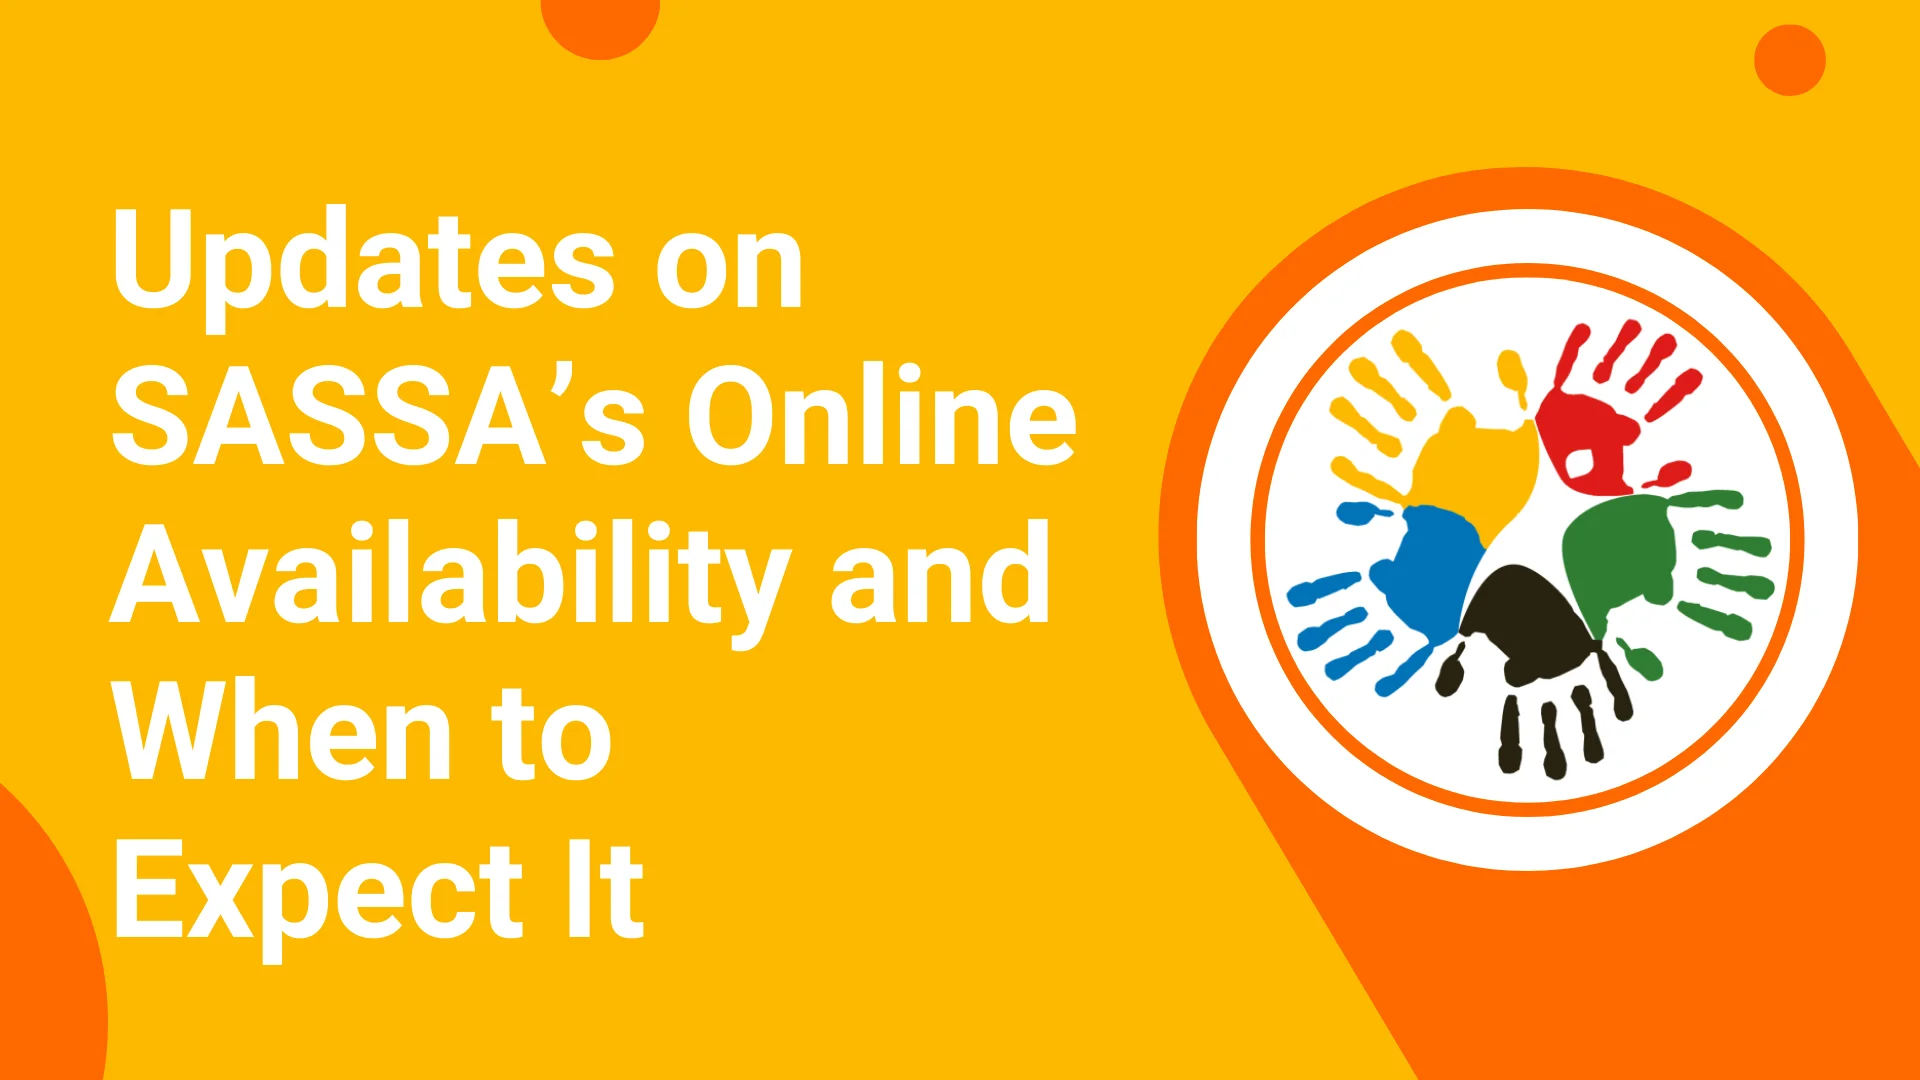 Updates on SASSA’s Online Availability and When to Expect It